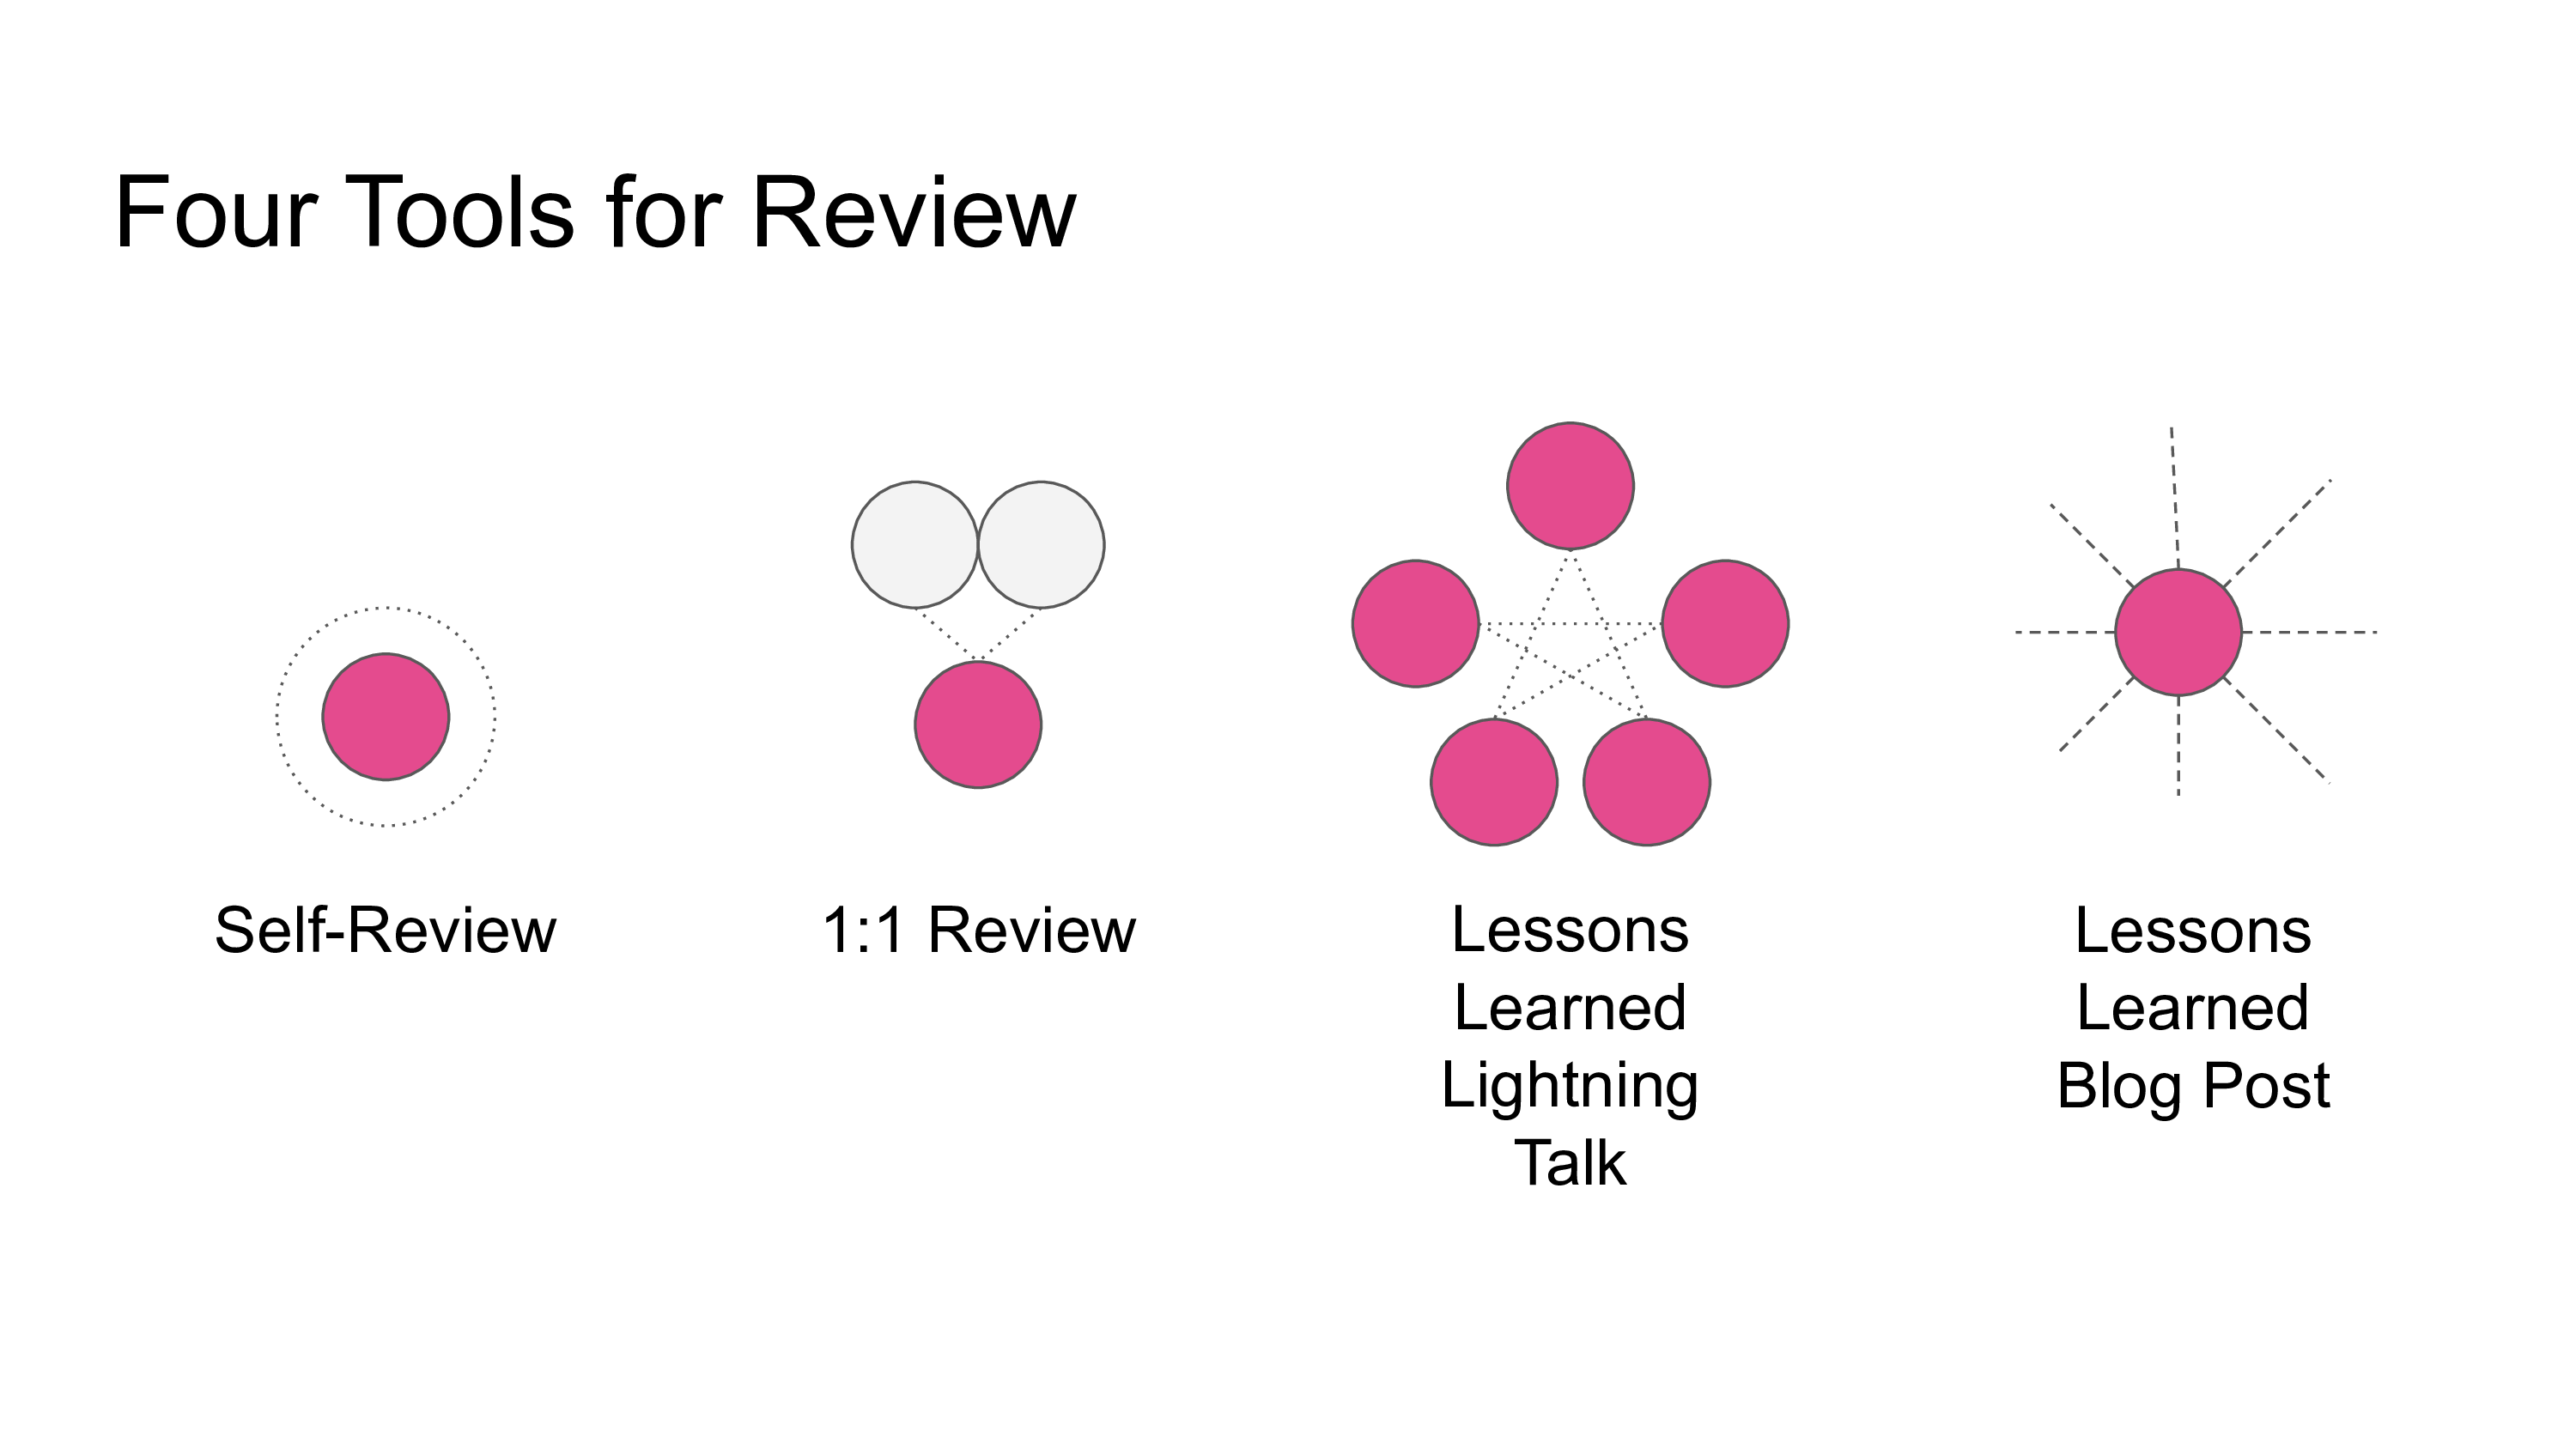 Our review modes: Self Review, 1:1 Review, Lessons Learned Lightning Talk, and Lessons Learned Blog Post